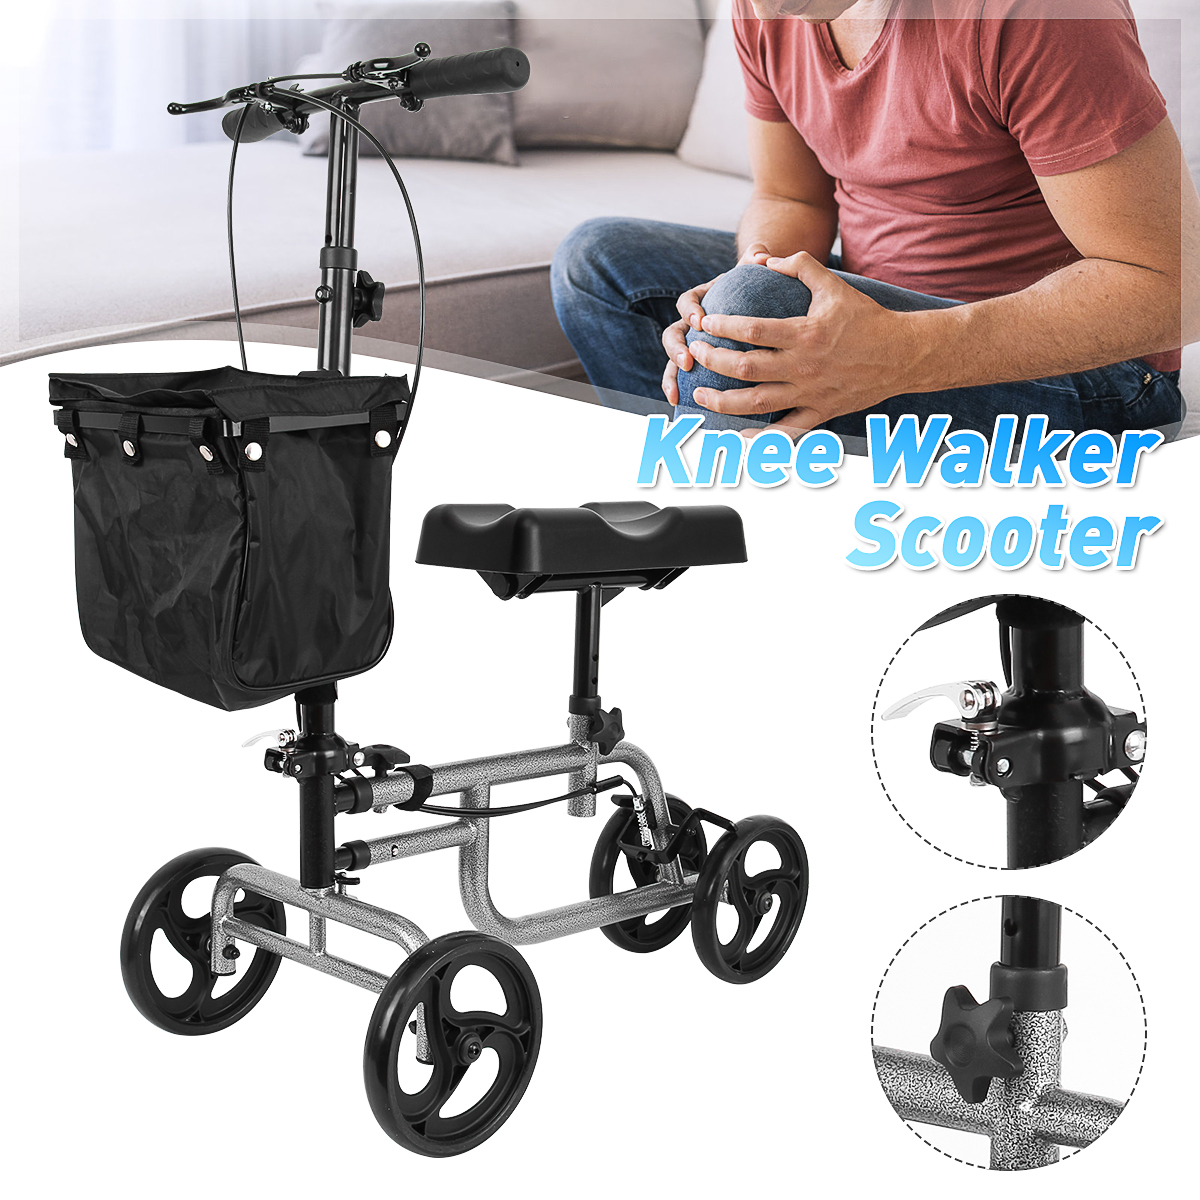 Knee-Walker-Scooter-Foldable-Adjusted-Height-Walking-Aid-Knee-Support-and-Basket-1940439-1